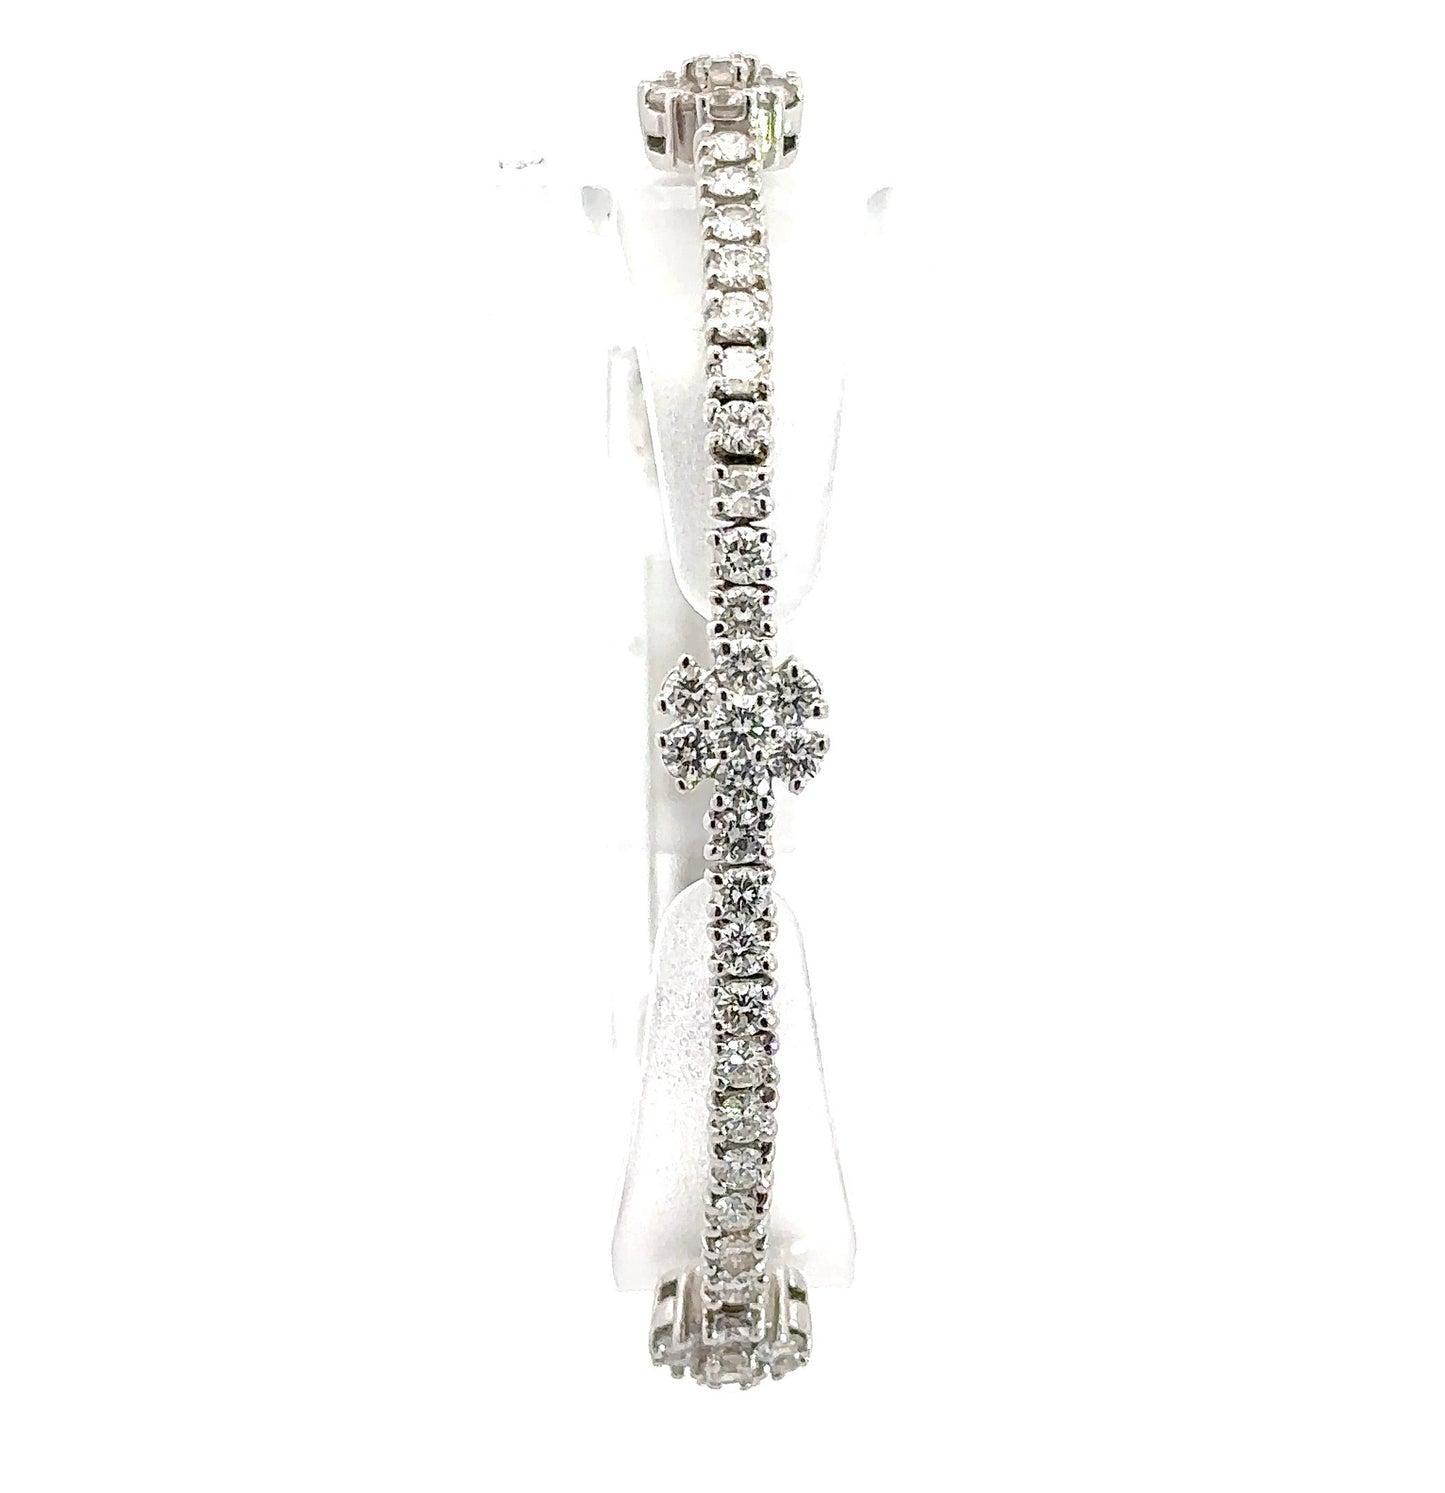 Front of diamond flower bracelet with round diamonds in a line and clusters of round diamonds making up a flower